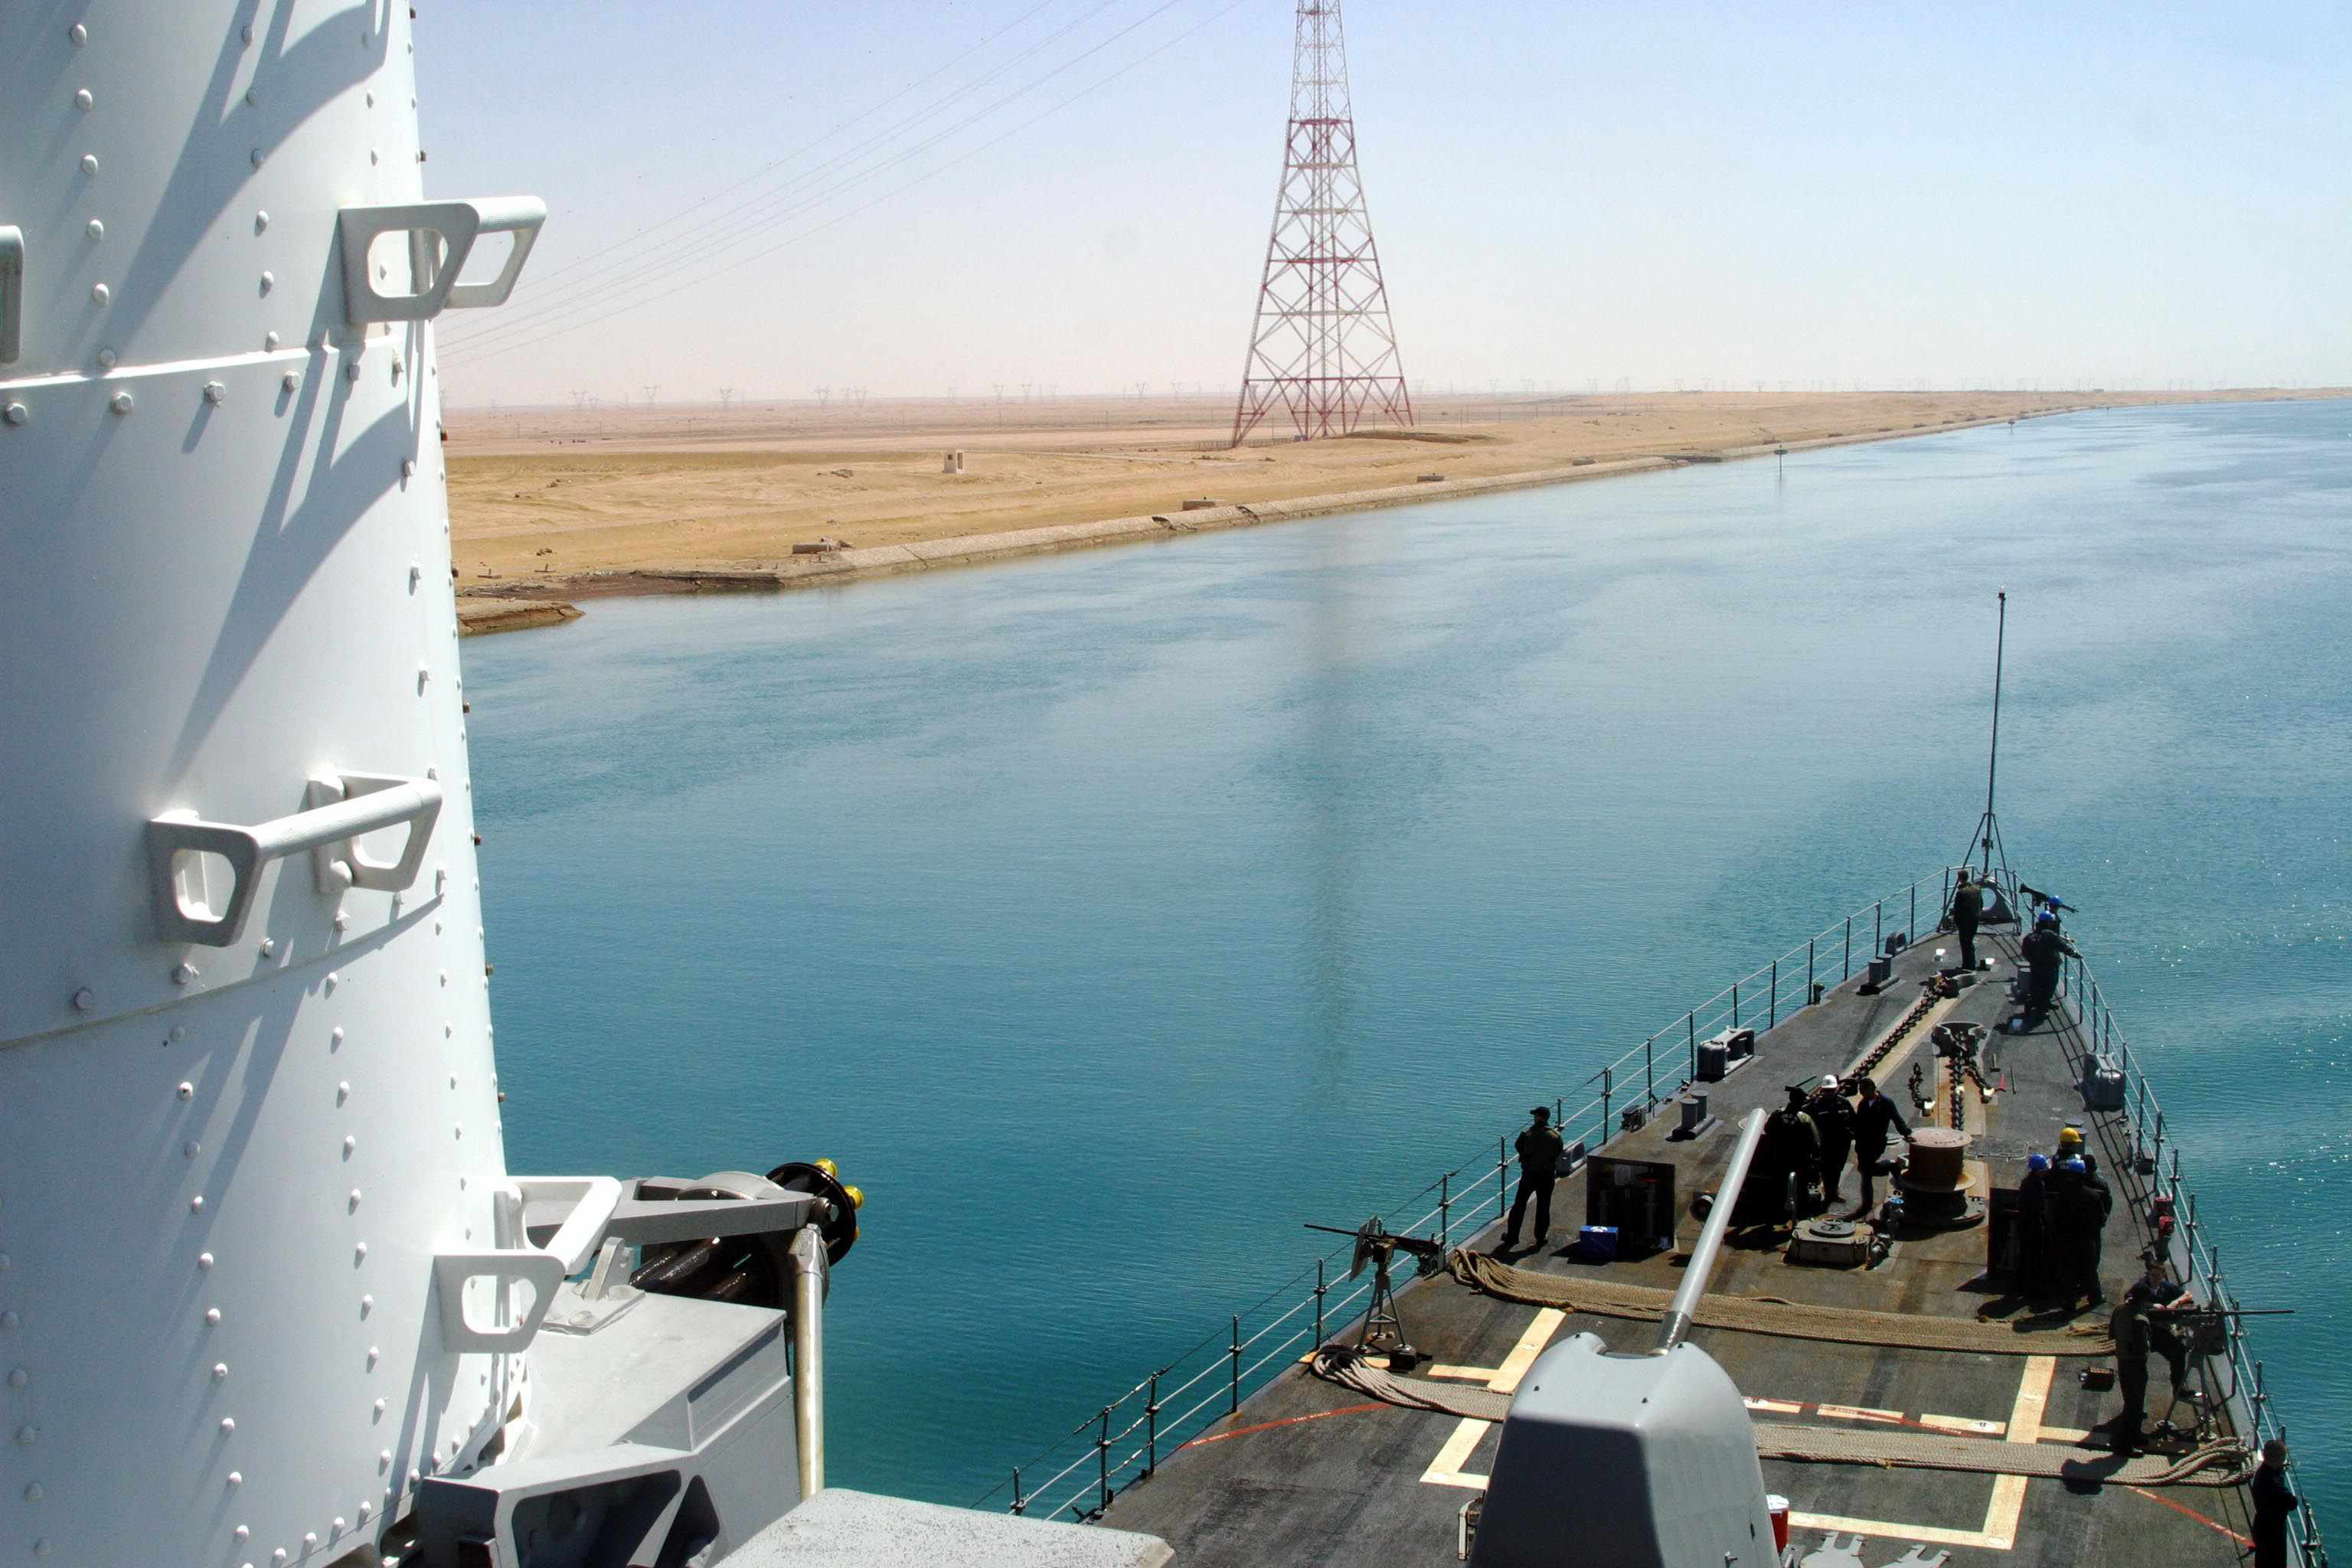 US_Navy_030314-N-0115R-050_The_crew_maintains_a_close_watch_as_the_spruance_class_destroyer_USS_Deyo_DD_989_transits_the_Suez_Canal_from_the_Mediterranean_Sea_to_the_Red_Sea.jpg